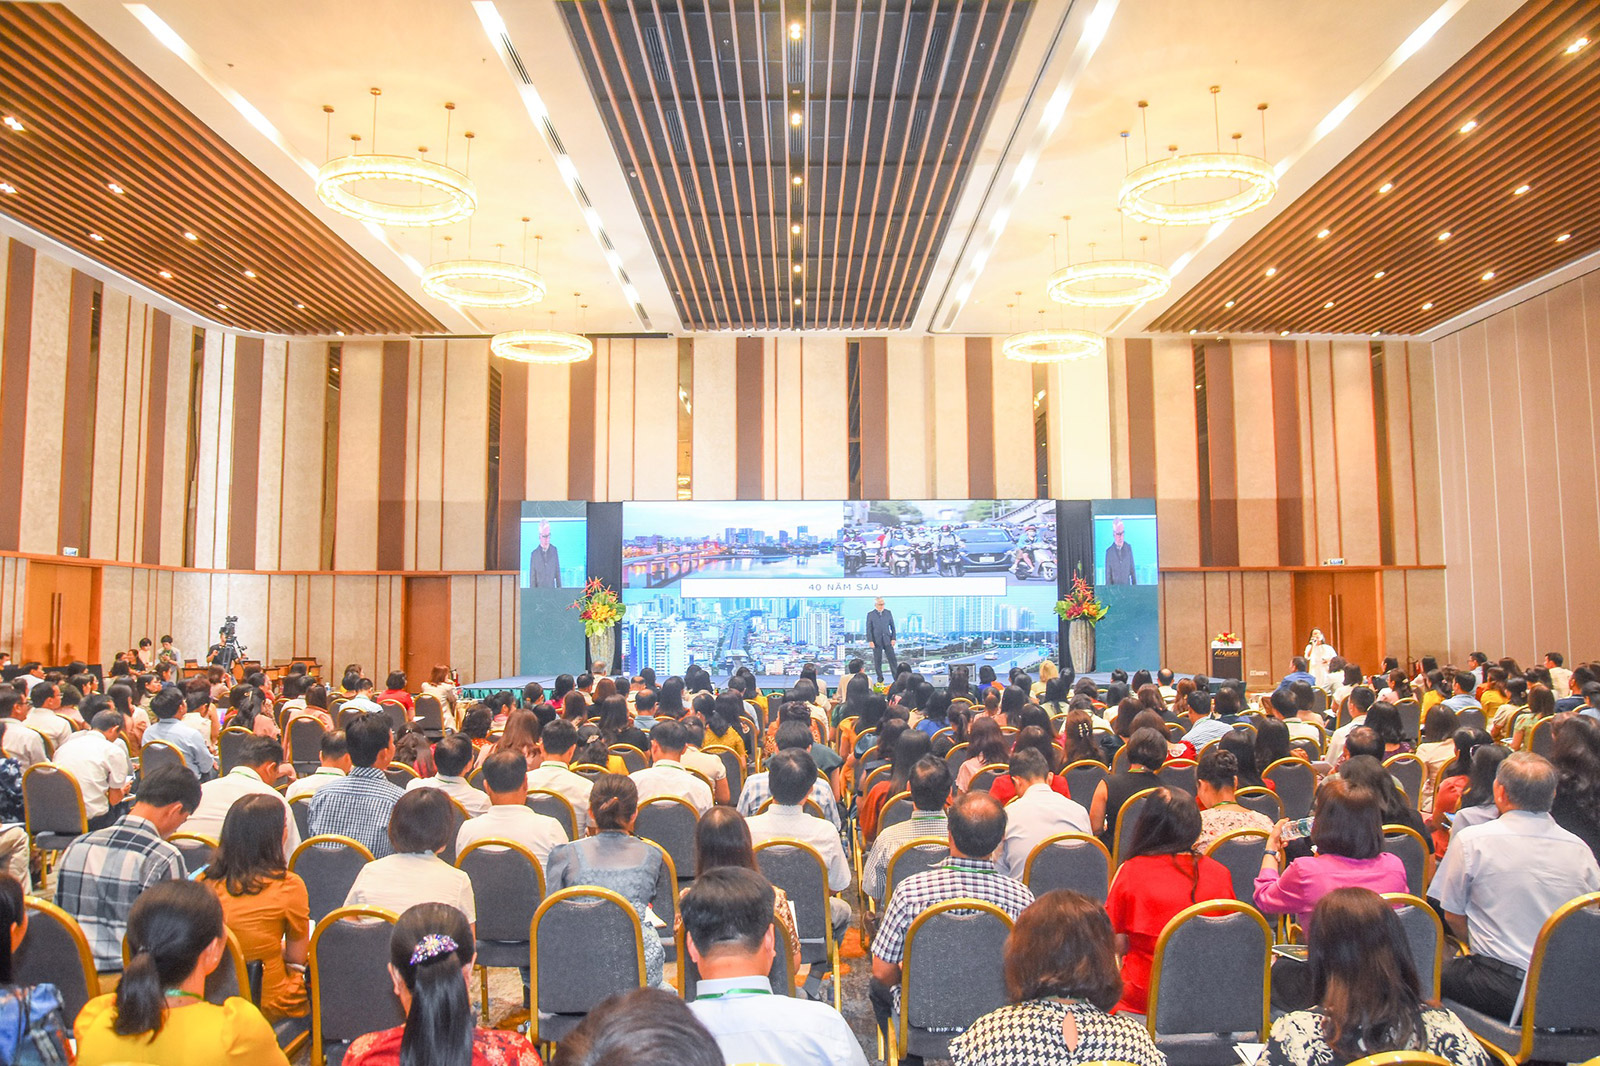 HOW TO CREATE A HAPPY SCHOOL ENVIRONMENT WAS PUT IN THE SPOTLIGHT AT AN EDUCATIONAL WORKSHOP TOOK PLACE AT ARIYANA CONVENTION CENTRE DANANG.